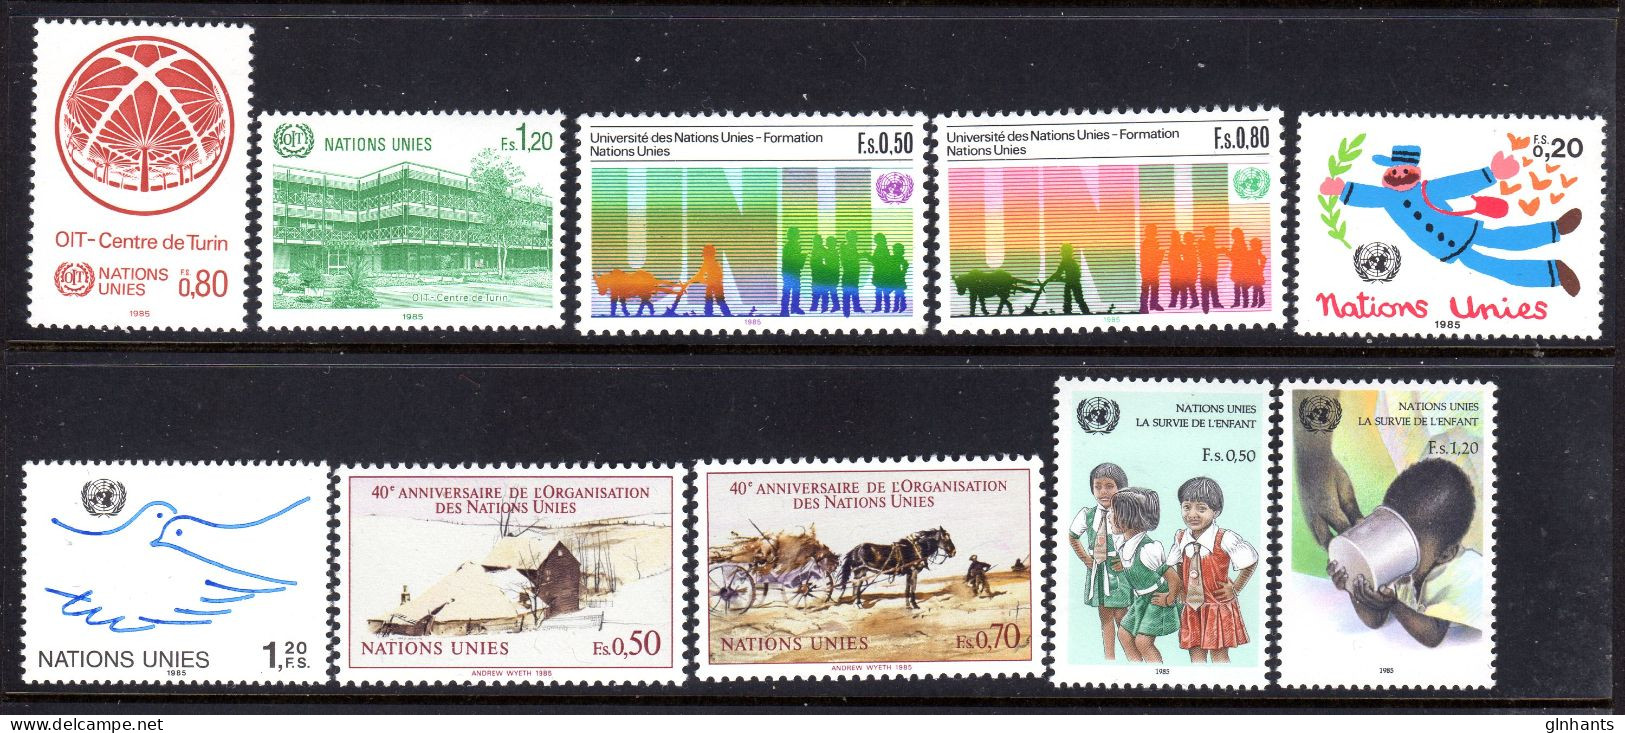 UNITED NATIONS UN GENEVA - 1985 COMPLETE YEAR SET (10V) AS PICTURED FINE MNH ** SG G129-G136, G138-G139 - Nuovi